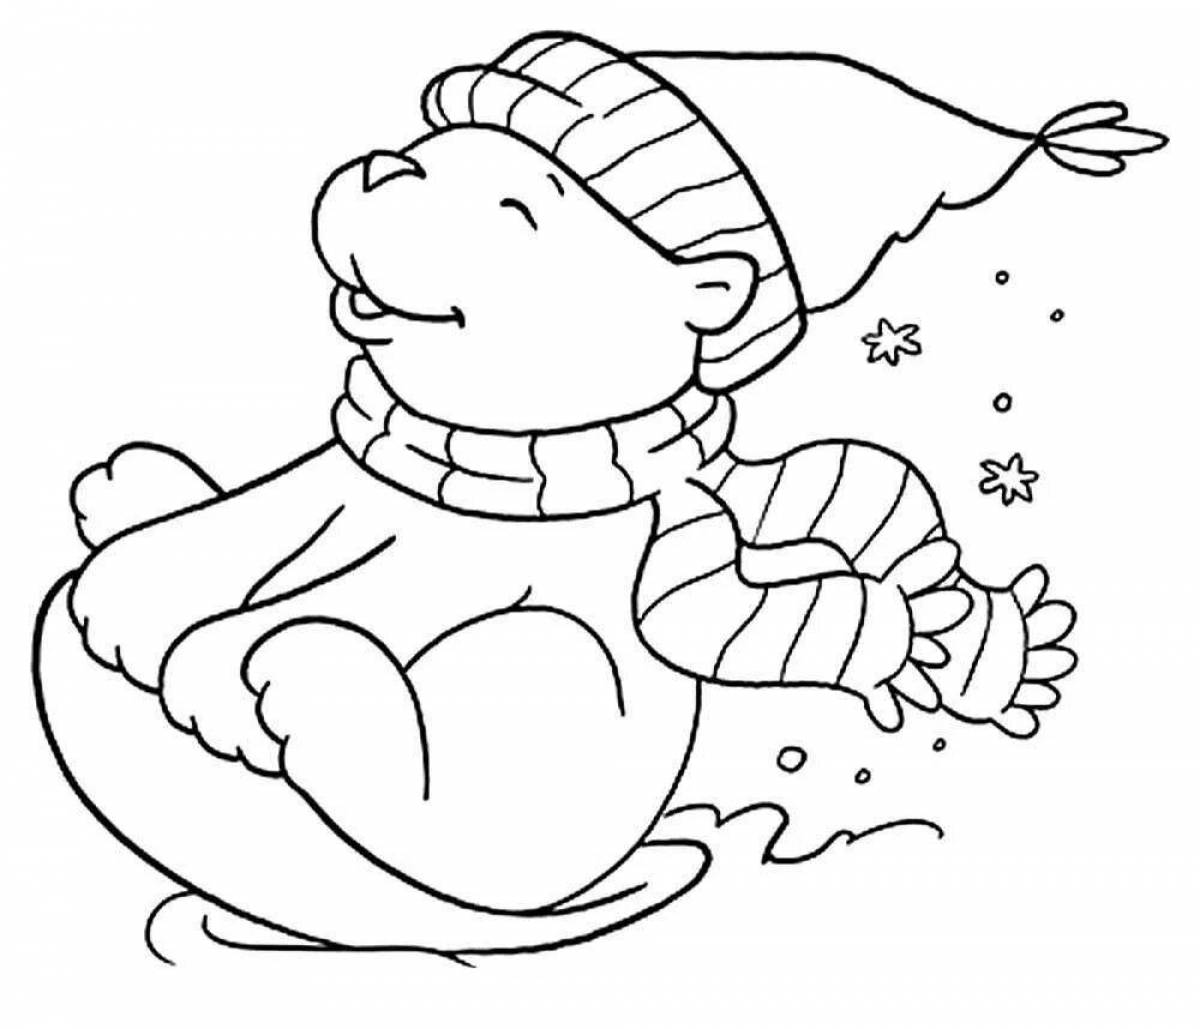 Coloring page playful snowman on a sled